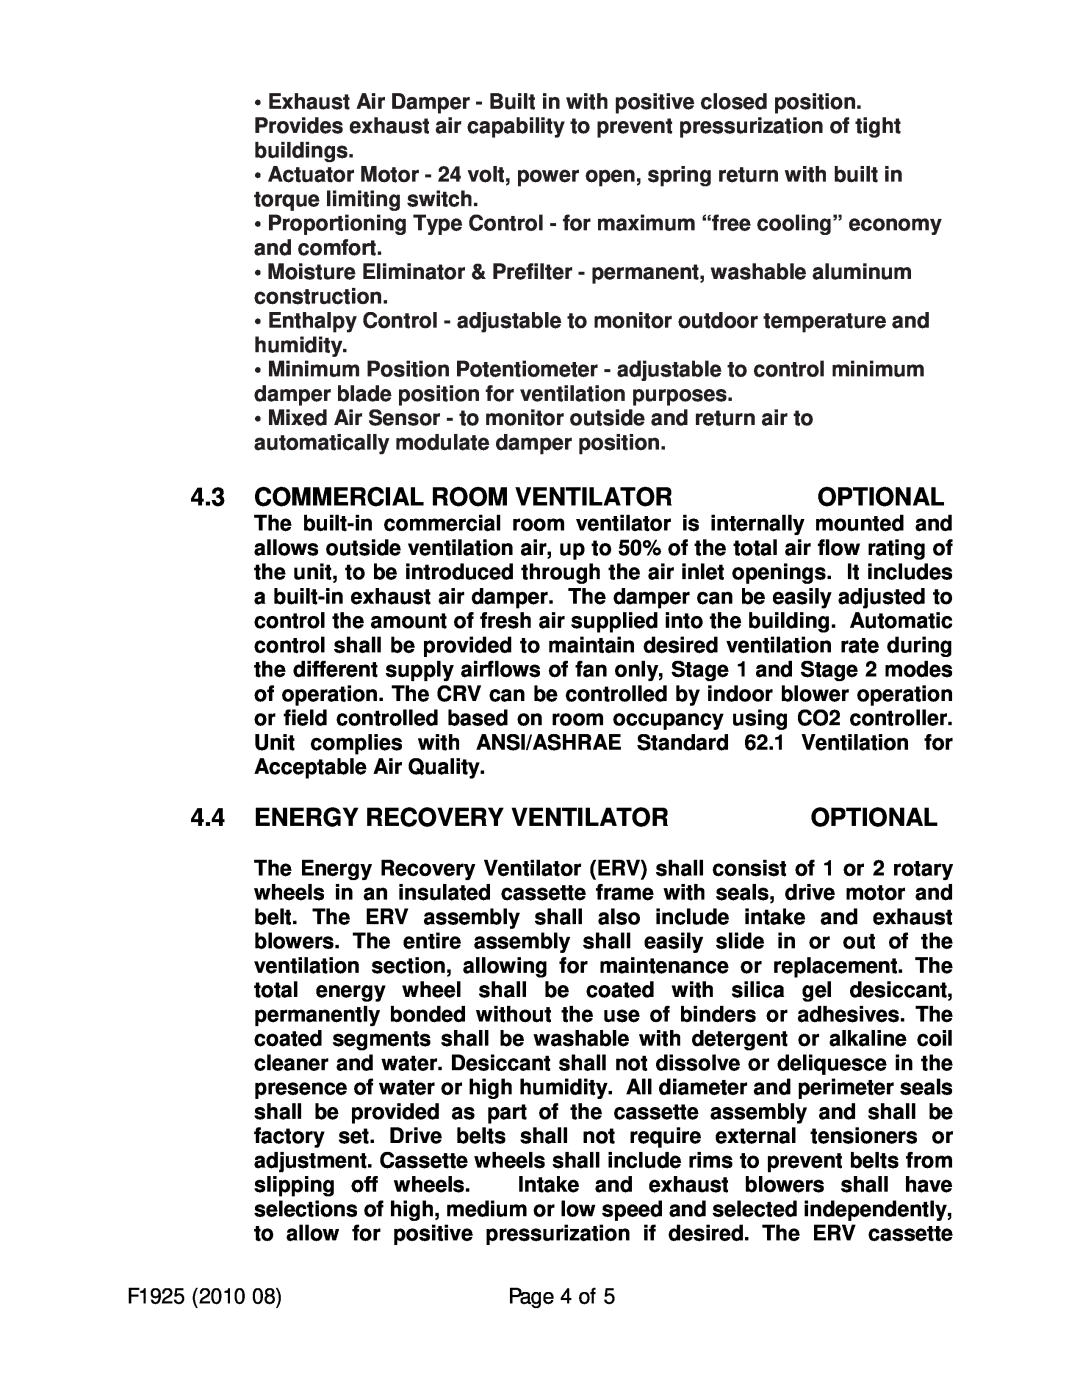 Bard F1925 manual Commercial Room Ventilator, Energy Recovery Ventilator, Page 4 of, Optional 